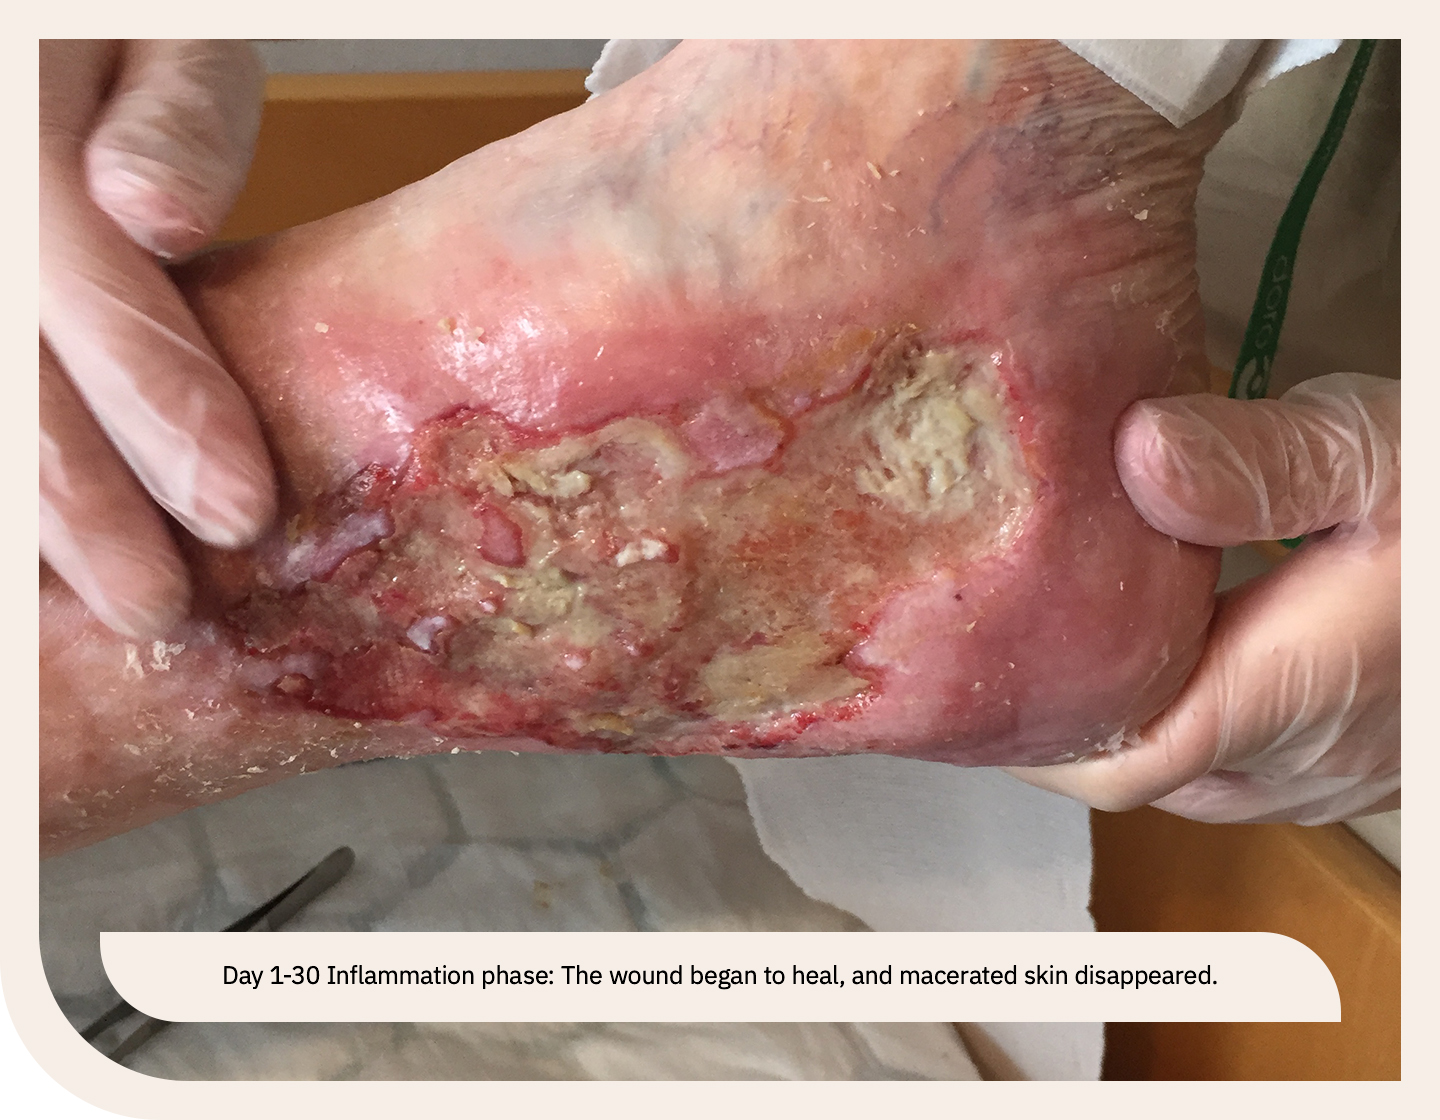 Leg ulcer in inflammation phase